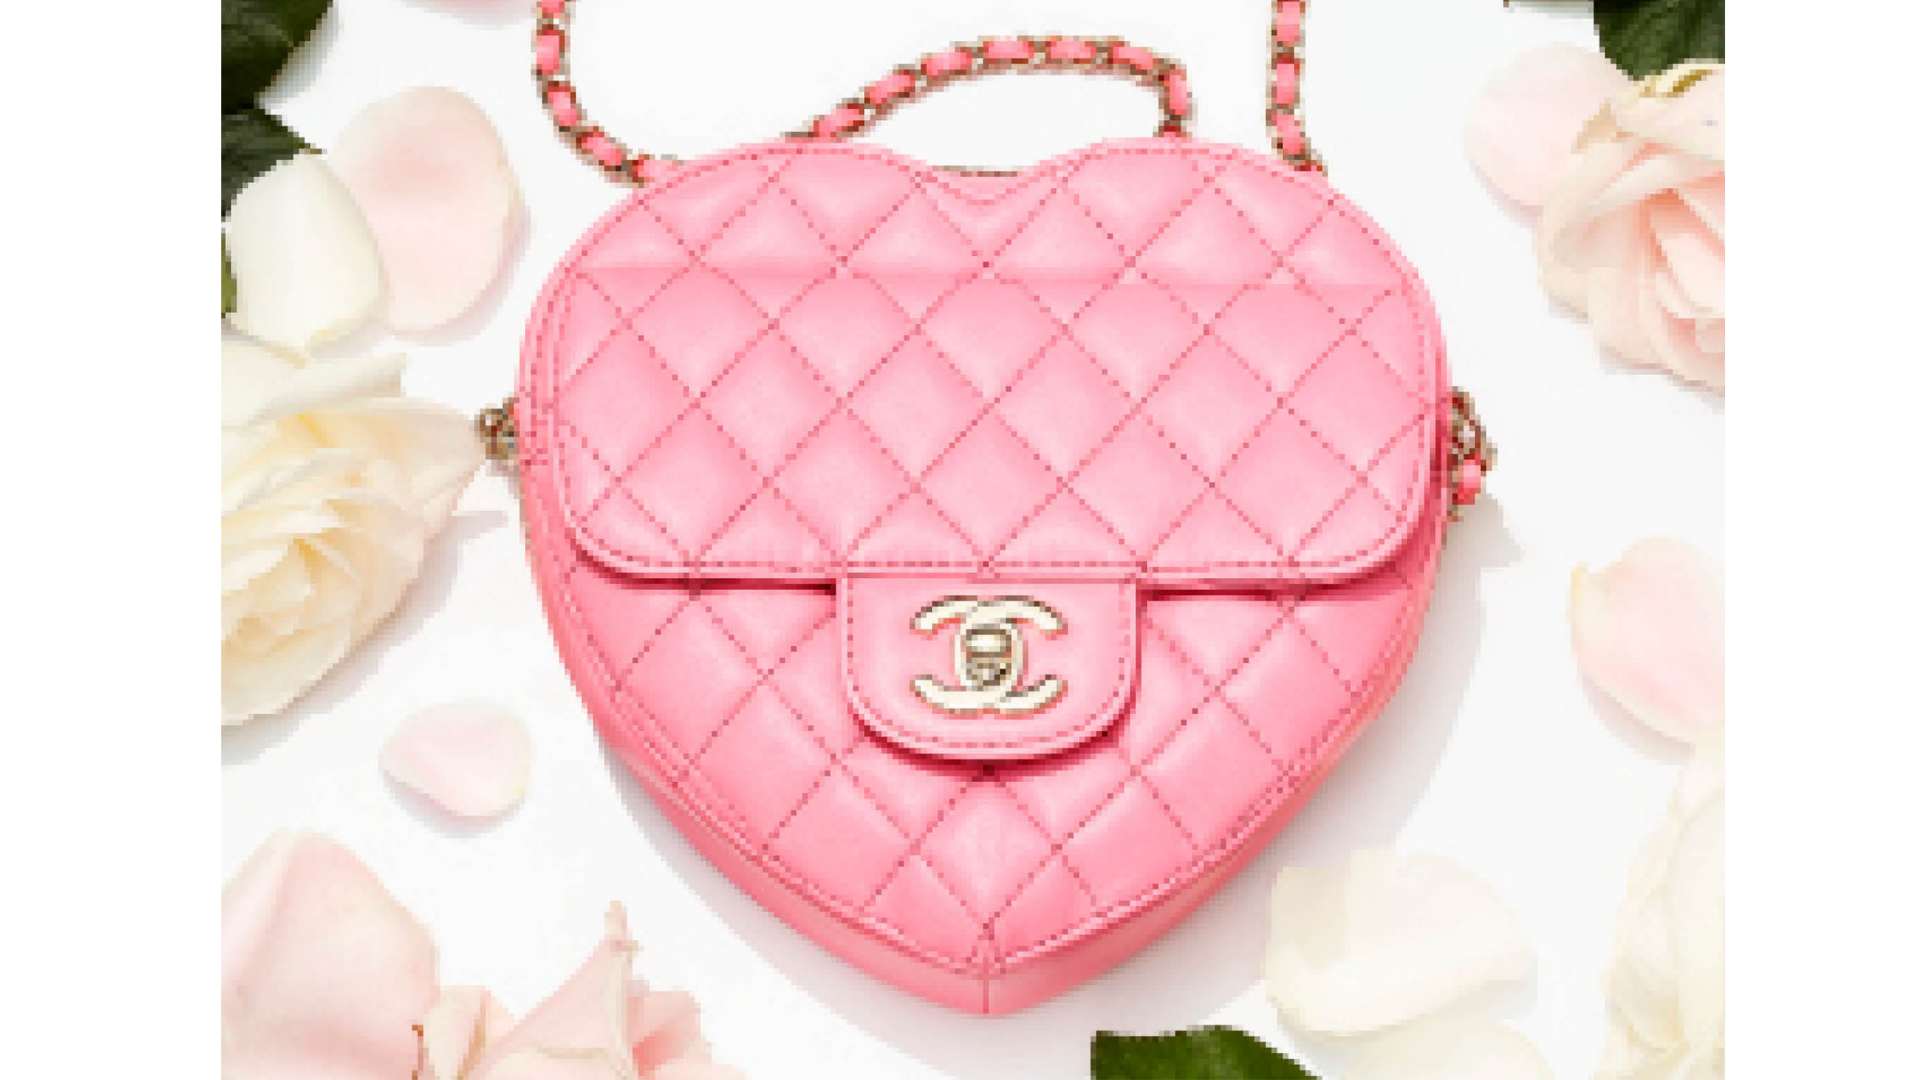 8 Handbags We're Falling In Love With In The Lead Up To Valentine's Day